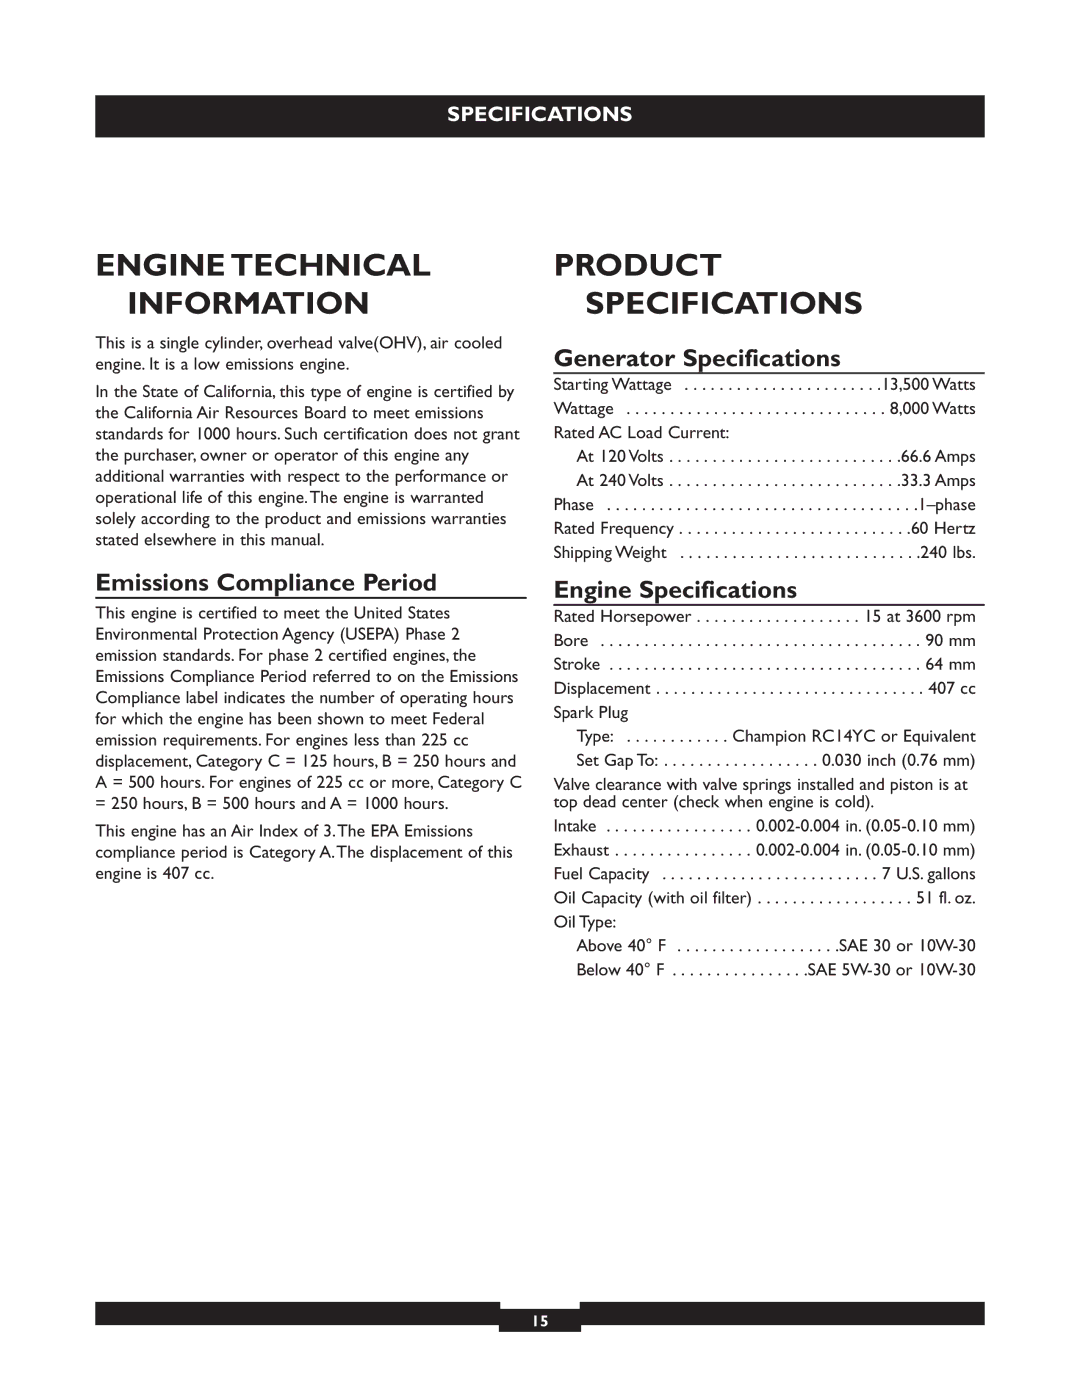 Briggs & Stratton 30244 Engine Technical Information, Product Specifications, Generator Specifications 